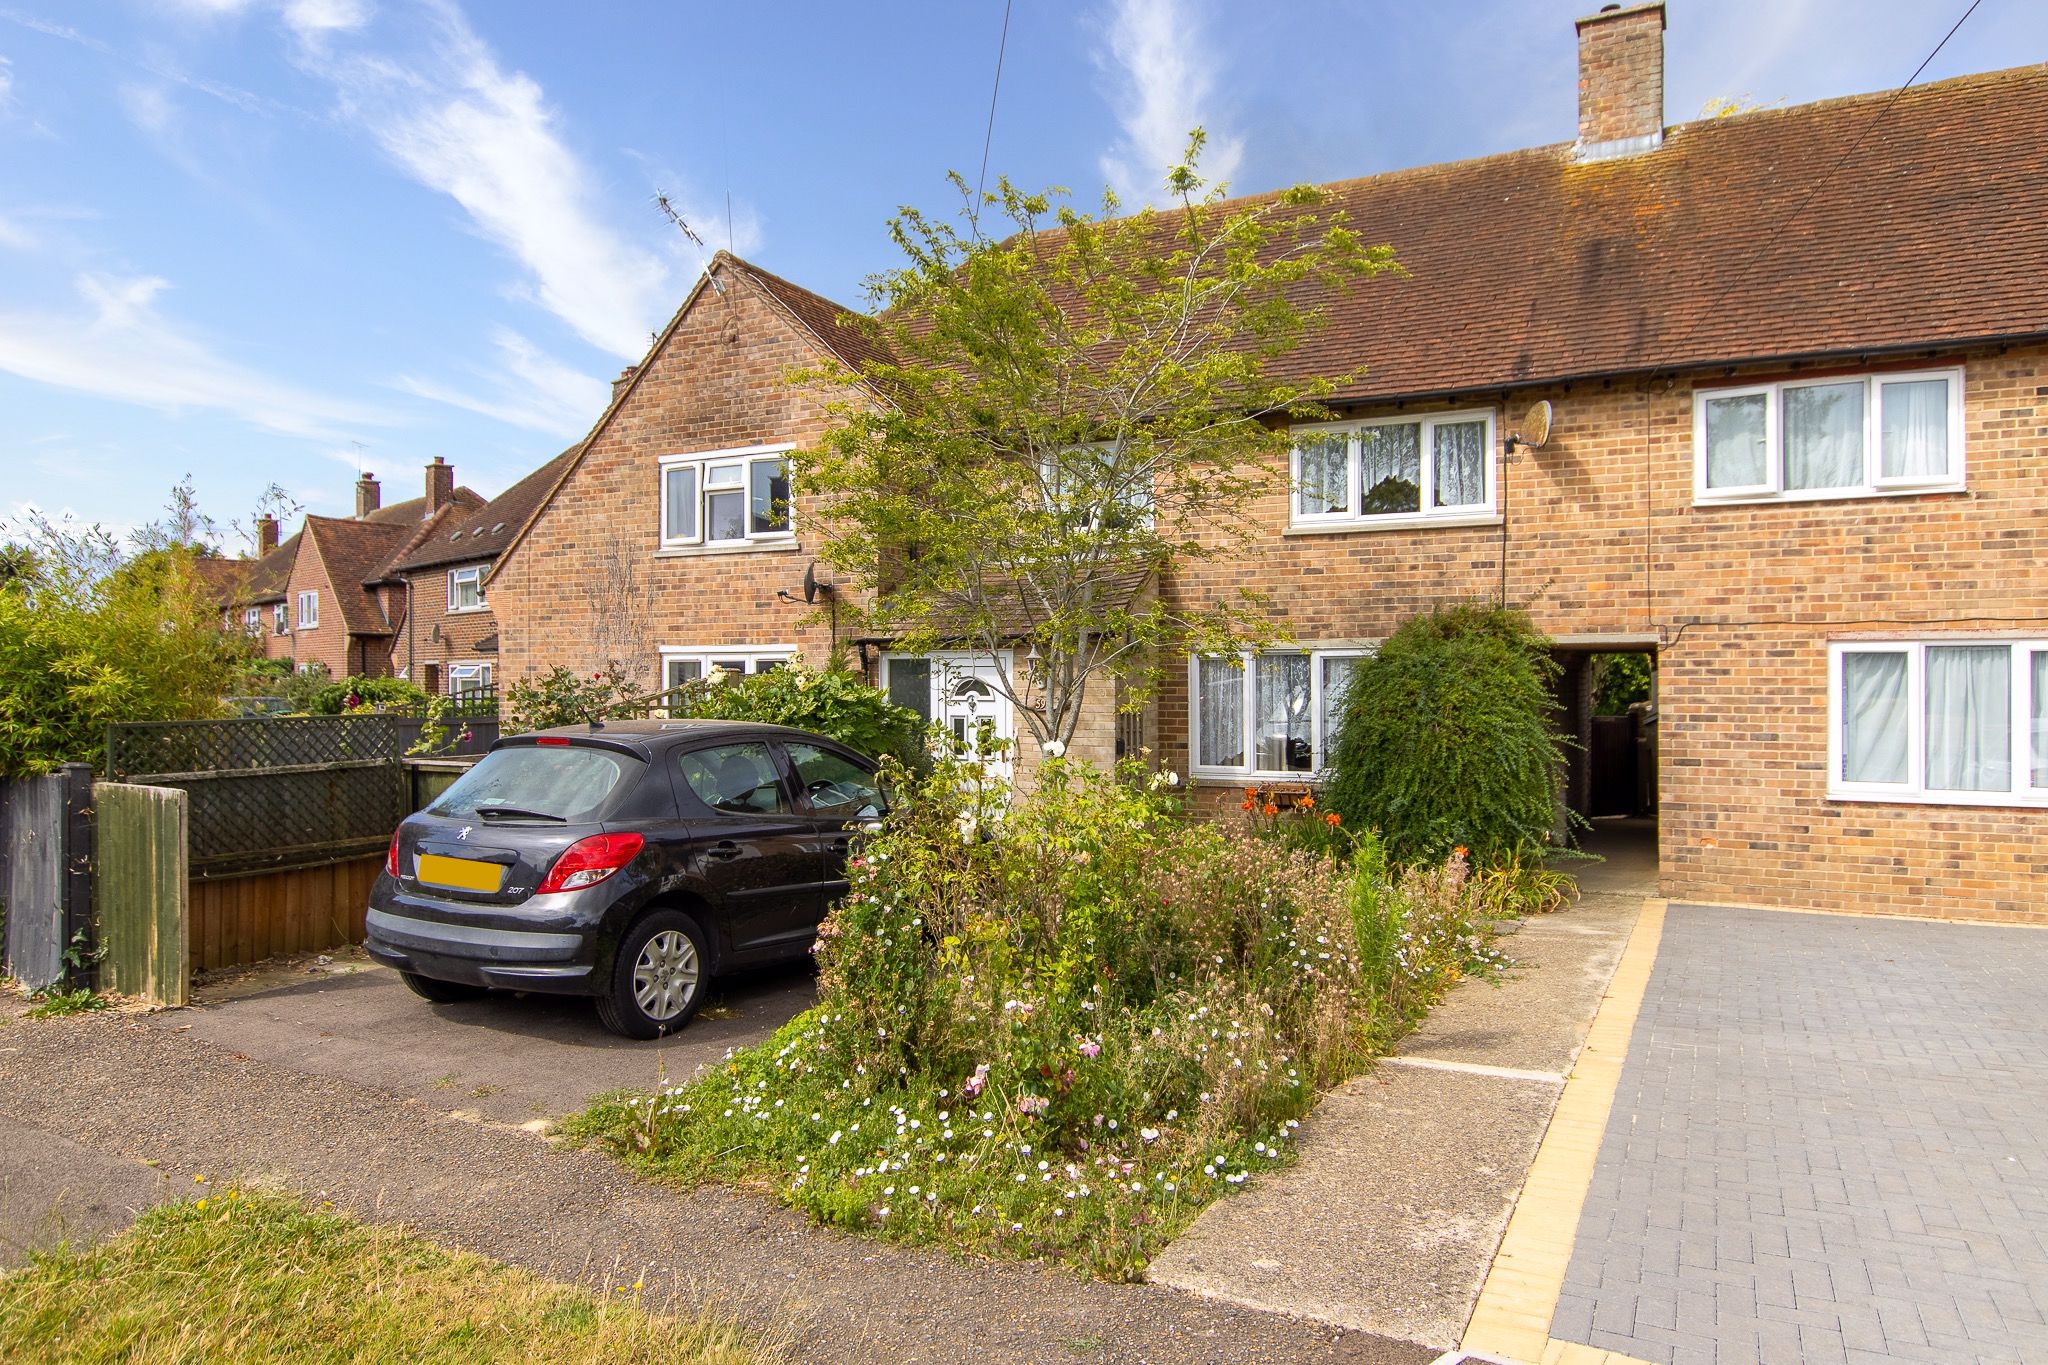 3 bed house for sale in Flatt Road, Nutbourne - Property Image 1